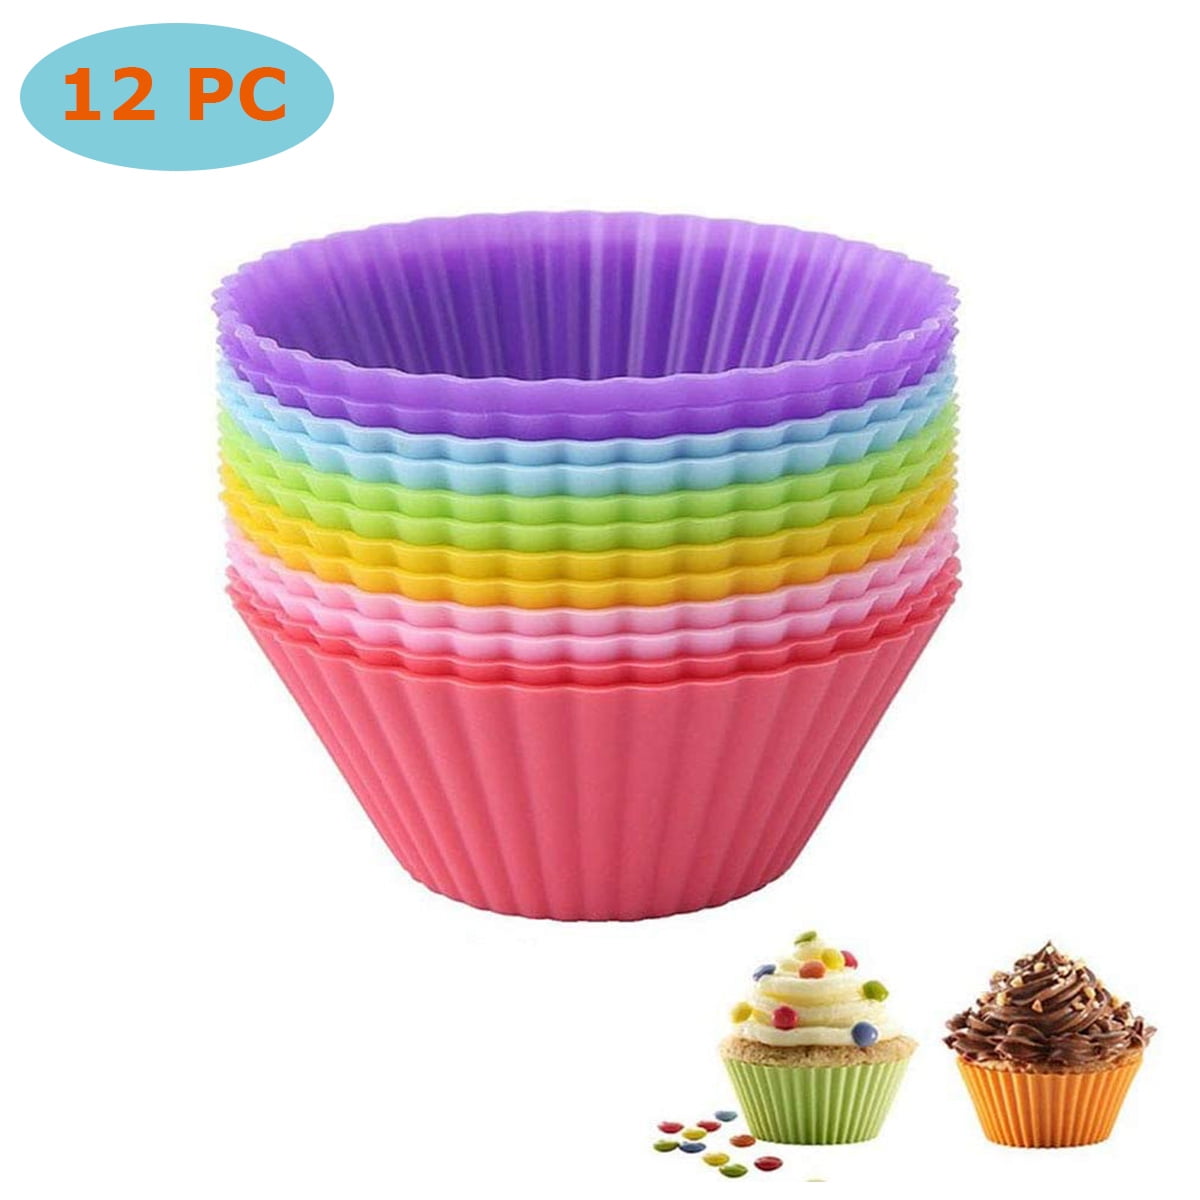 2 Sets of 12 NEW Multi-Color Silicone Flower Shaped Cupcake Molds/Holders 